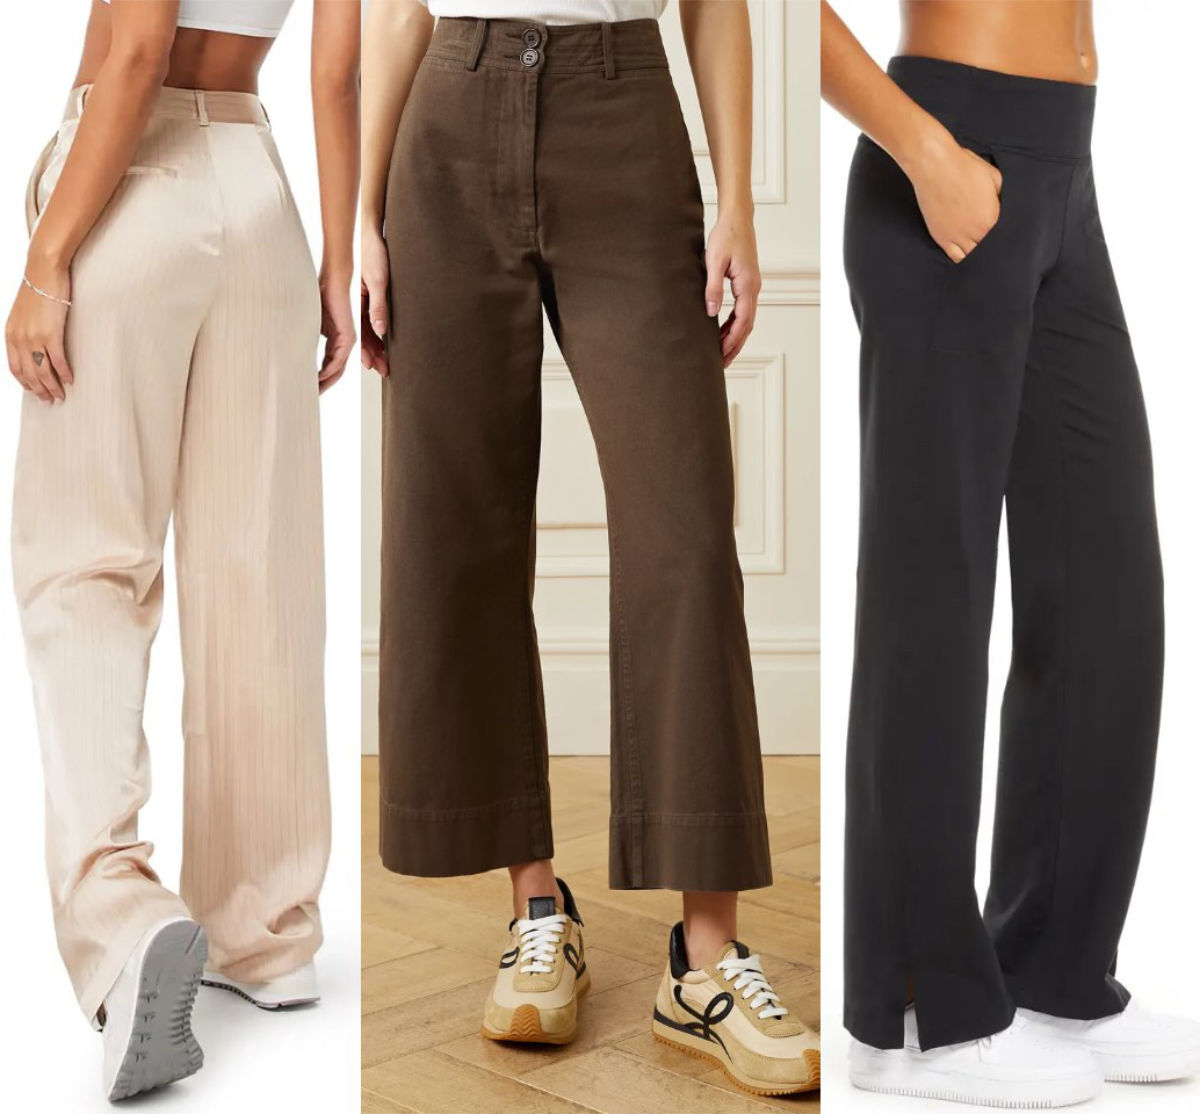 3 women wearing chunky sneakers with wide leg pants and trousers.